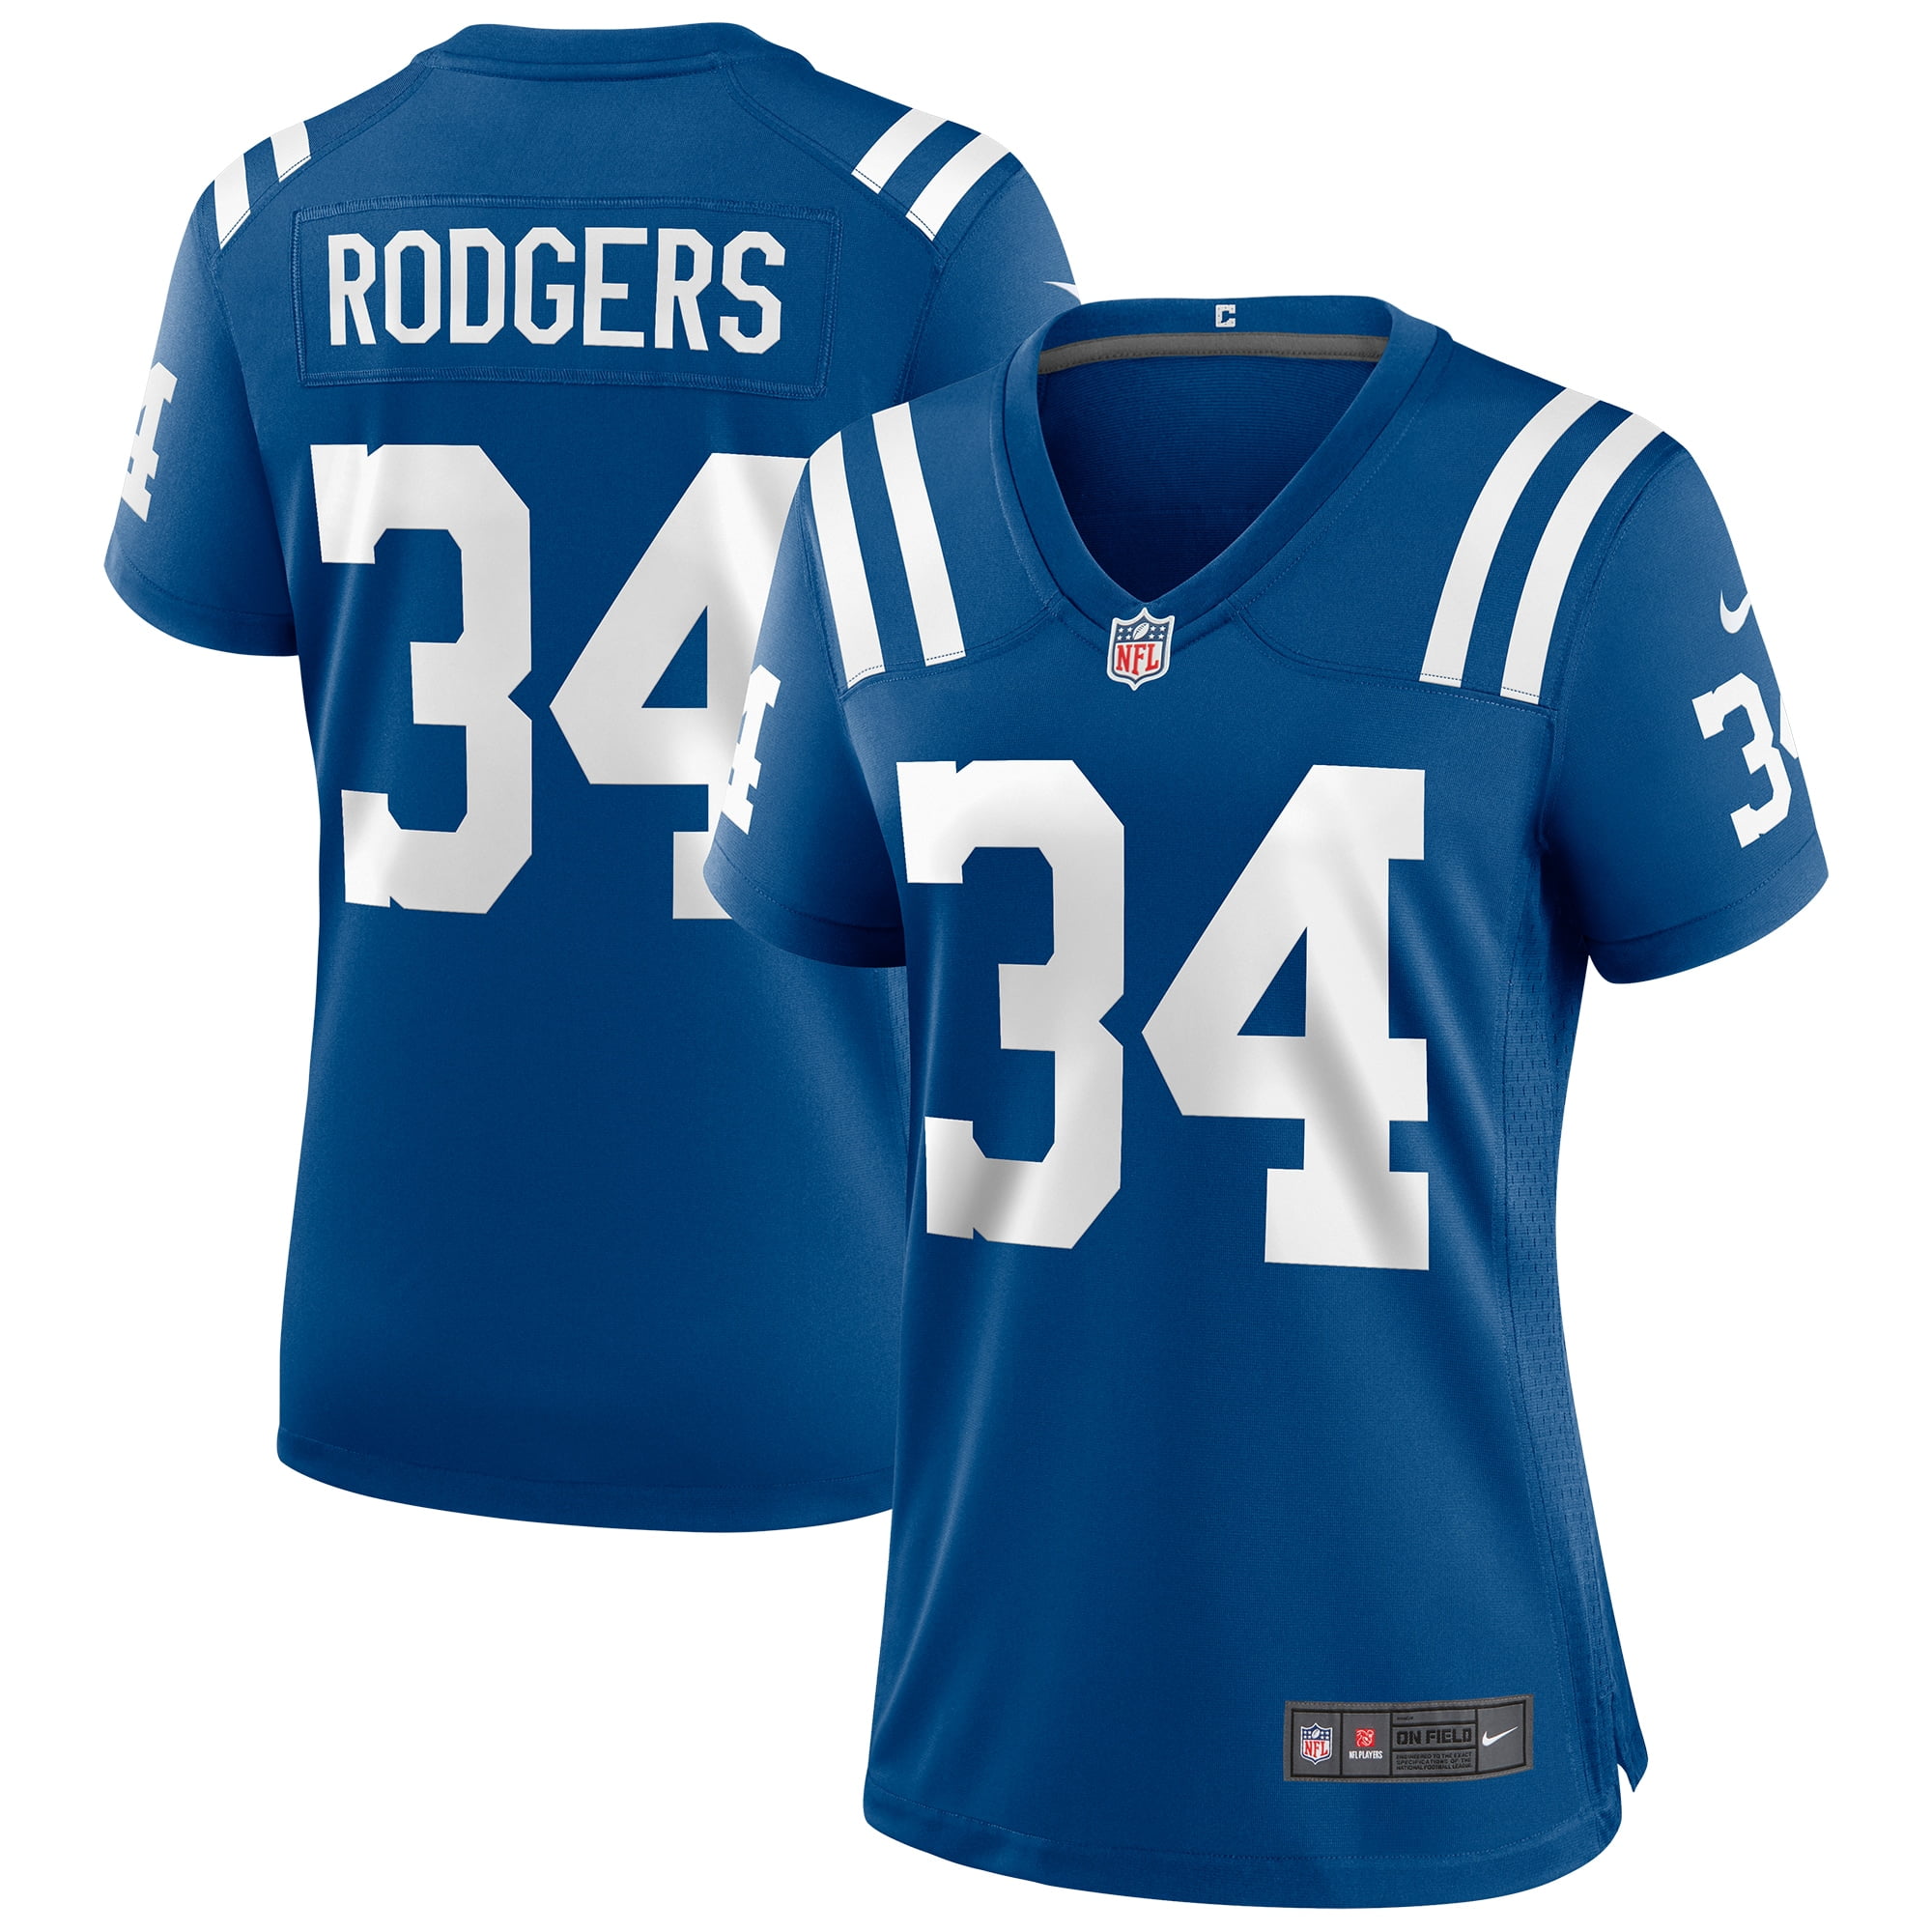 rodgers jersey